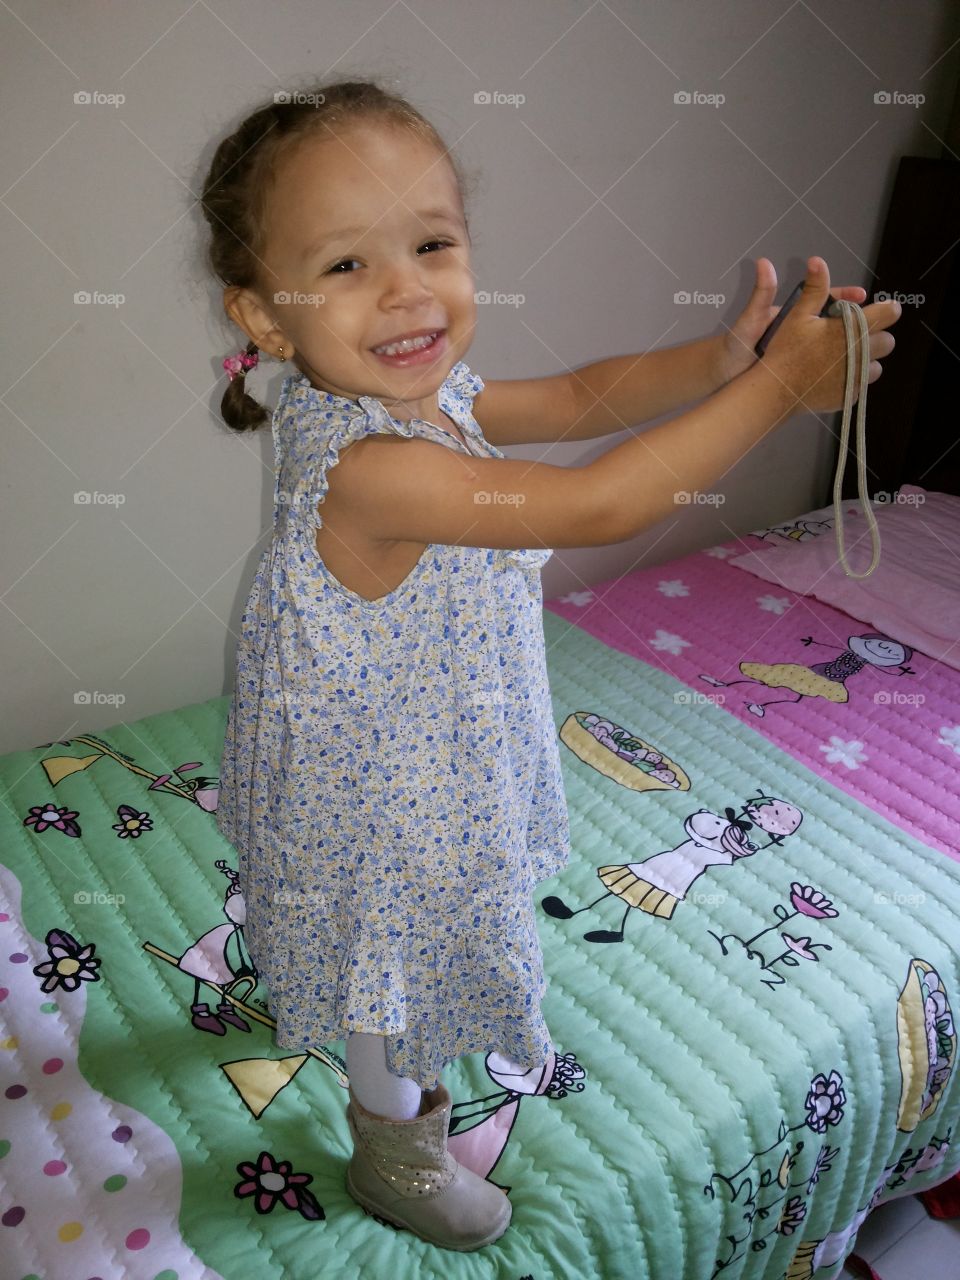 Toddler girl standing on bed